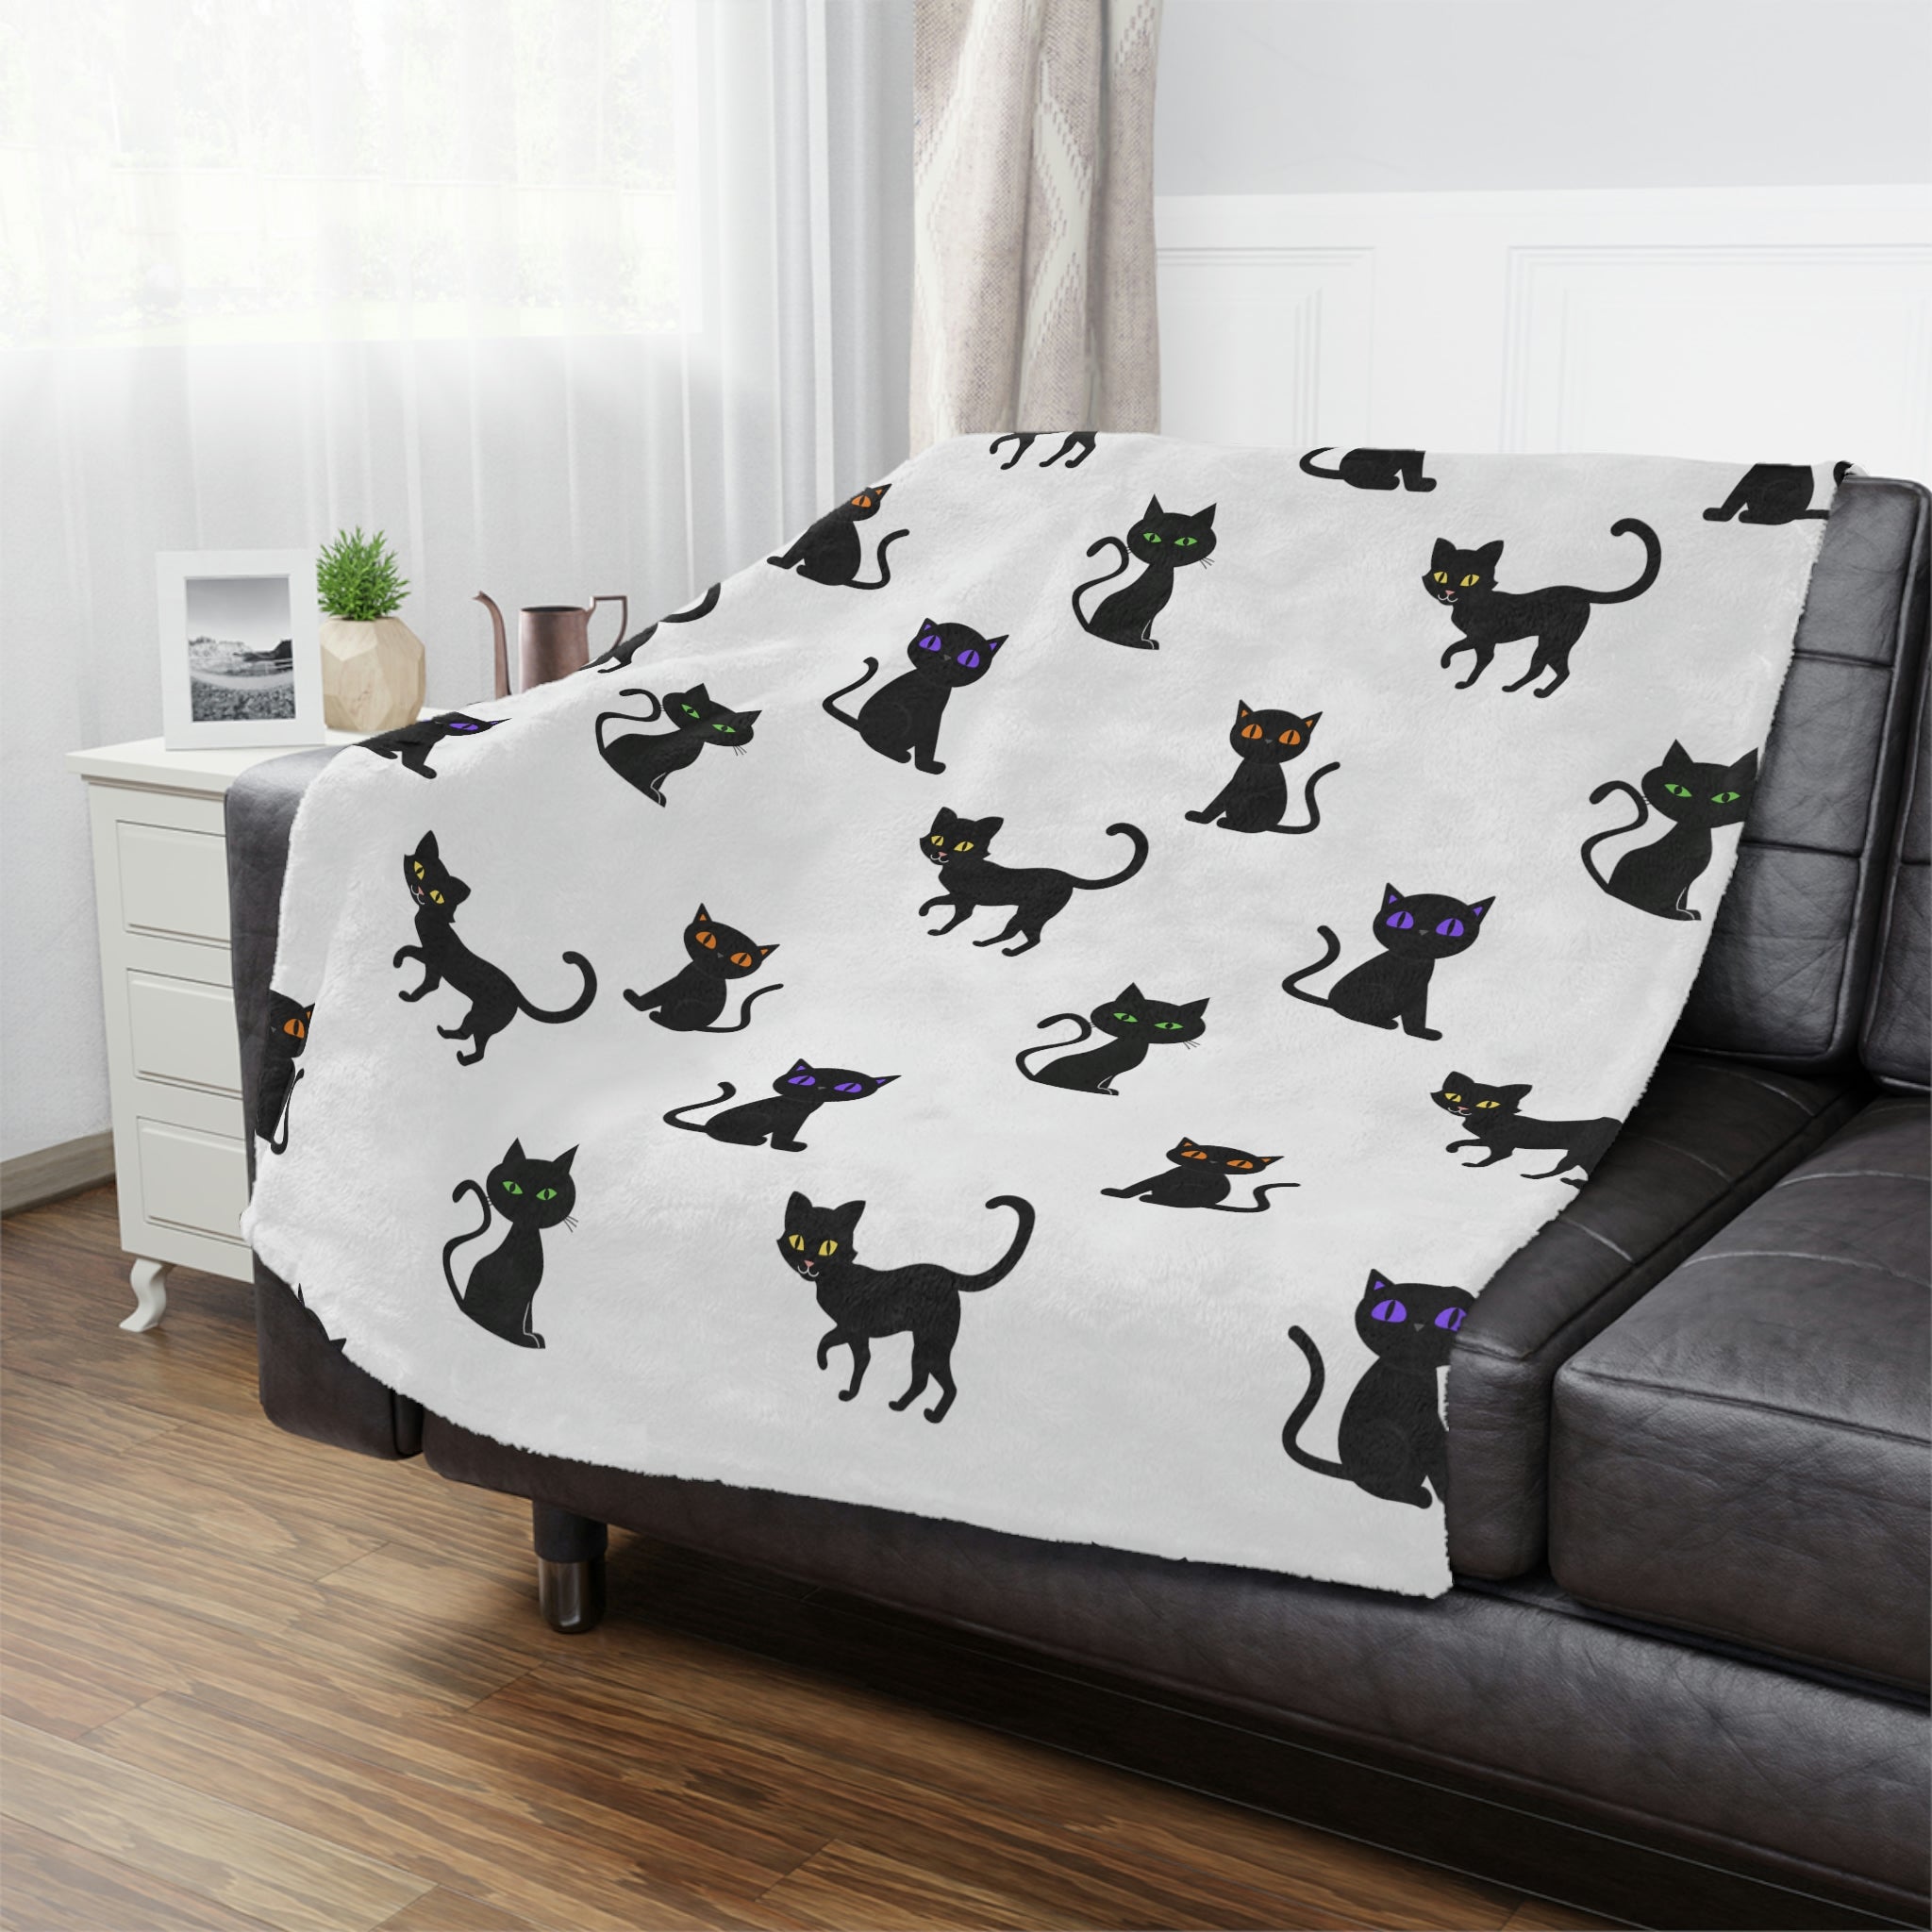 Black Cat Throw Blanket, White Minky, Kids or Adult Size - Durazza